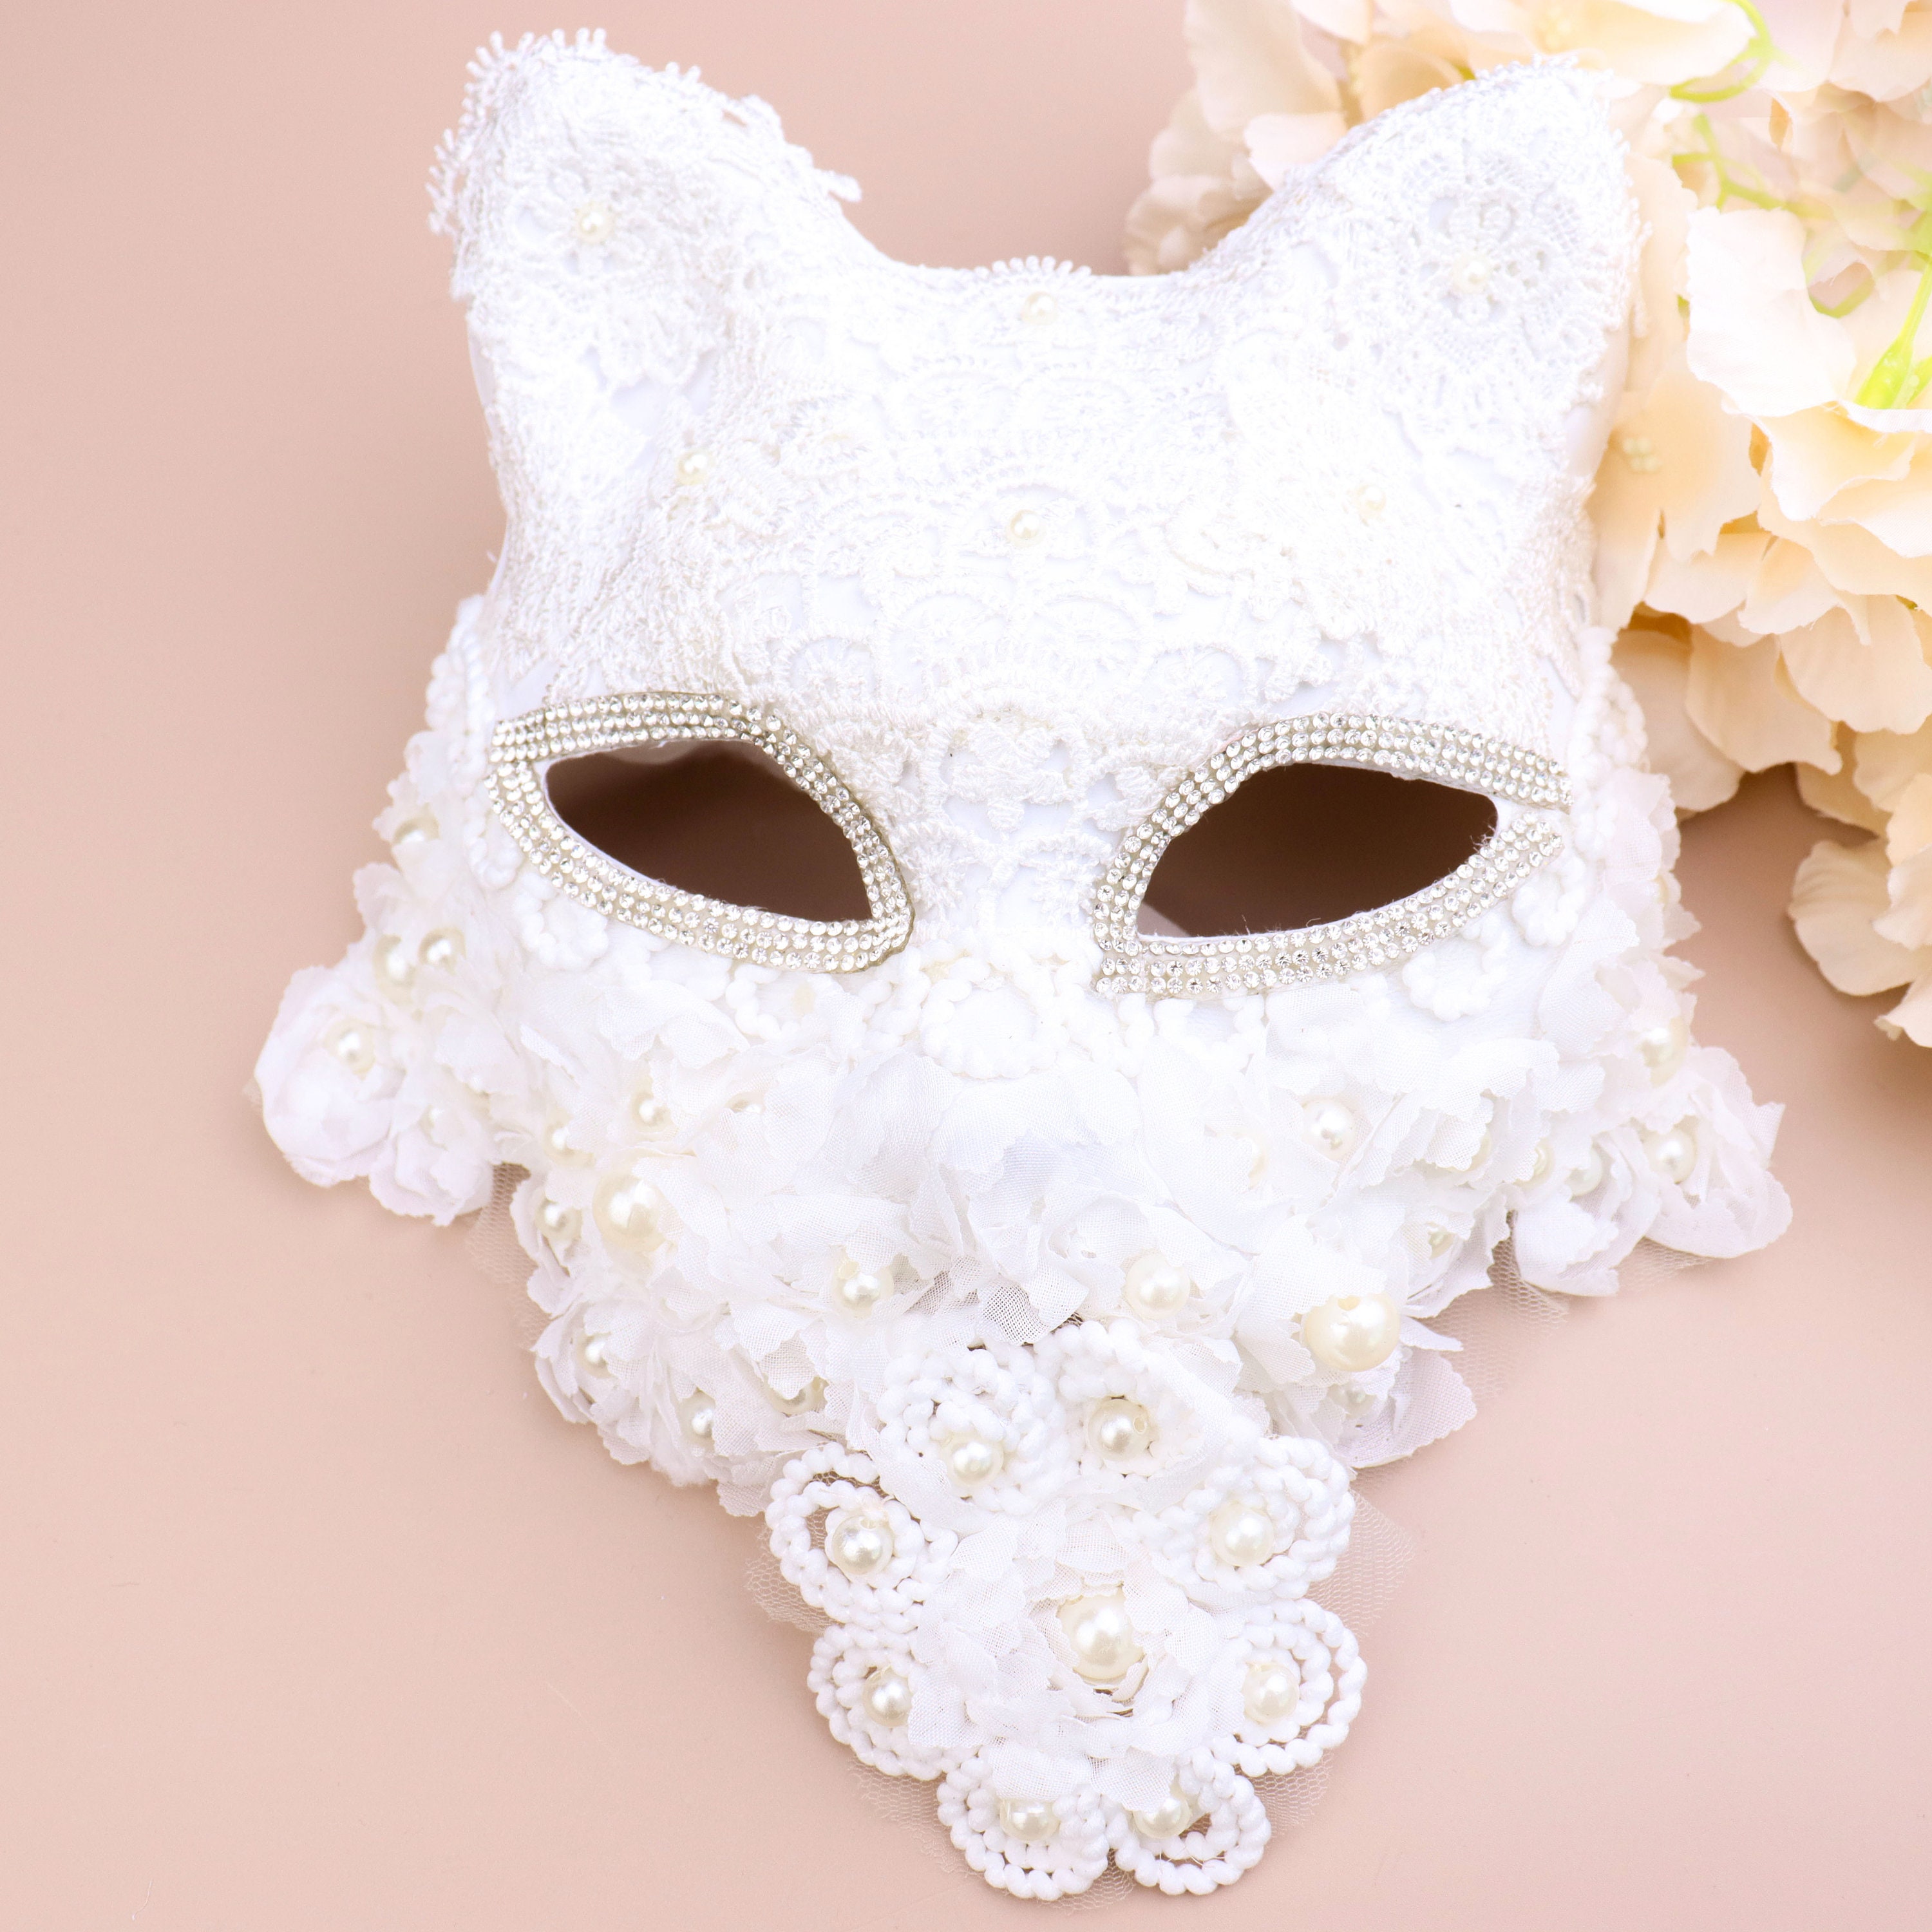 White Cat Mask With Set of Colors and Brushes to Paint It Mask With Colors  Handmade Carnival Mask 